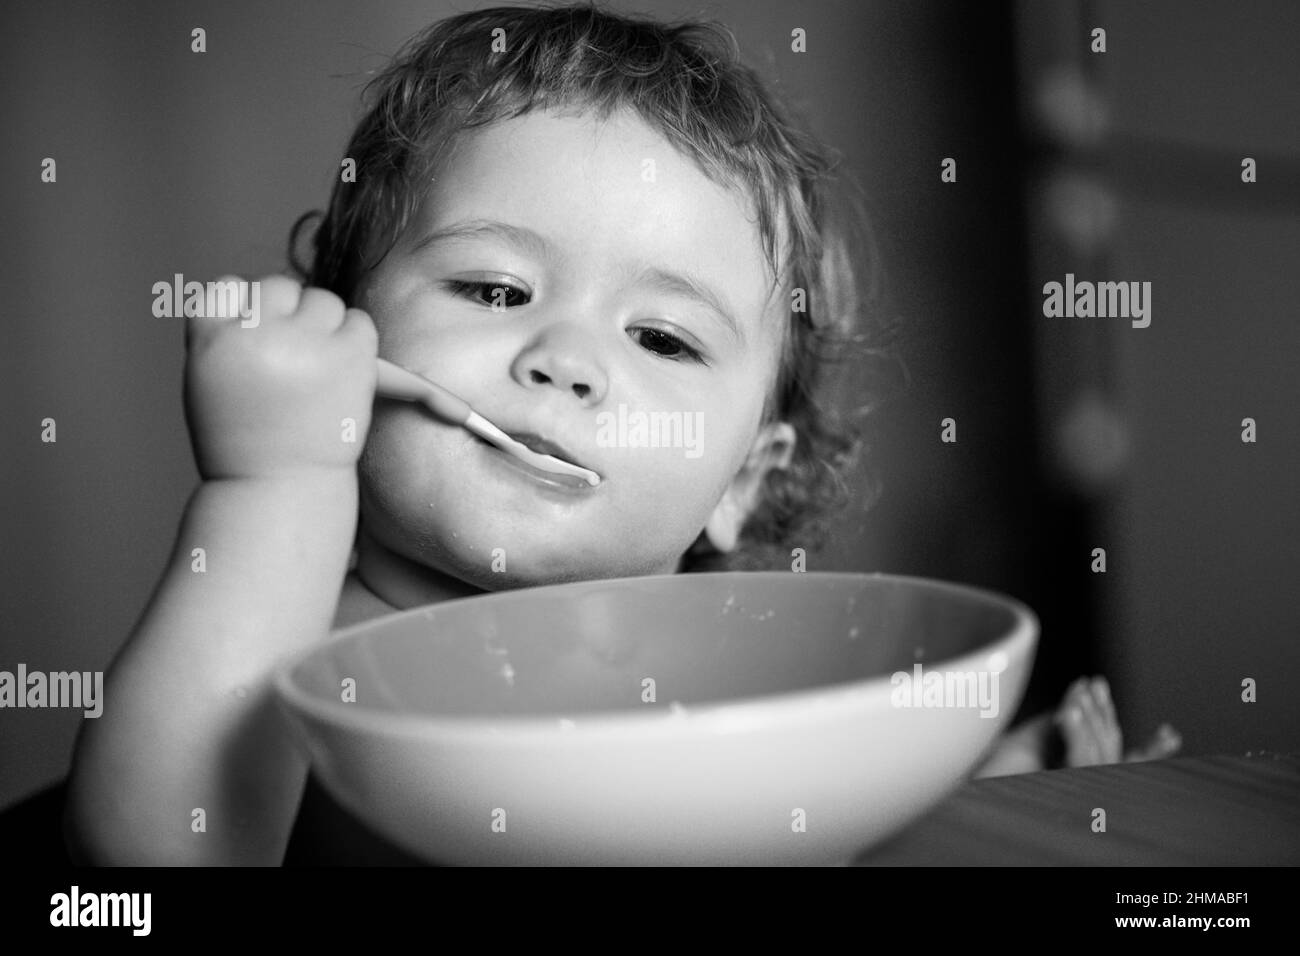 Portrait of funny little baby boy eating from plate holding spoon ...